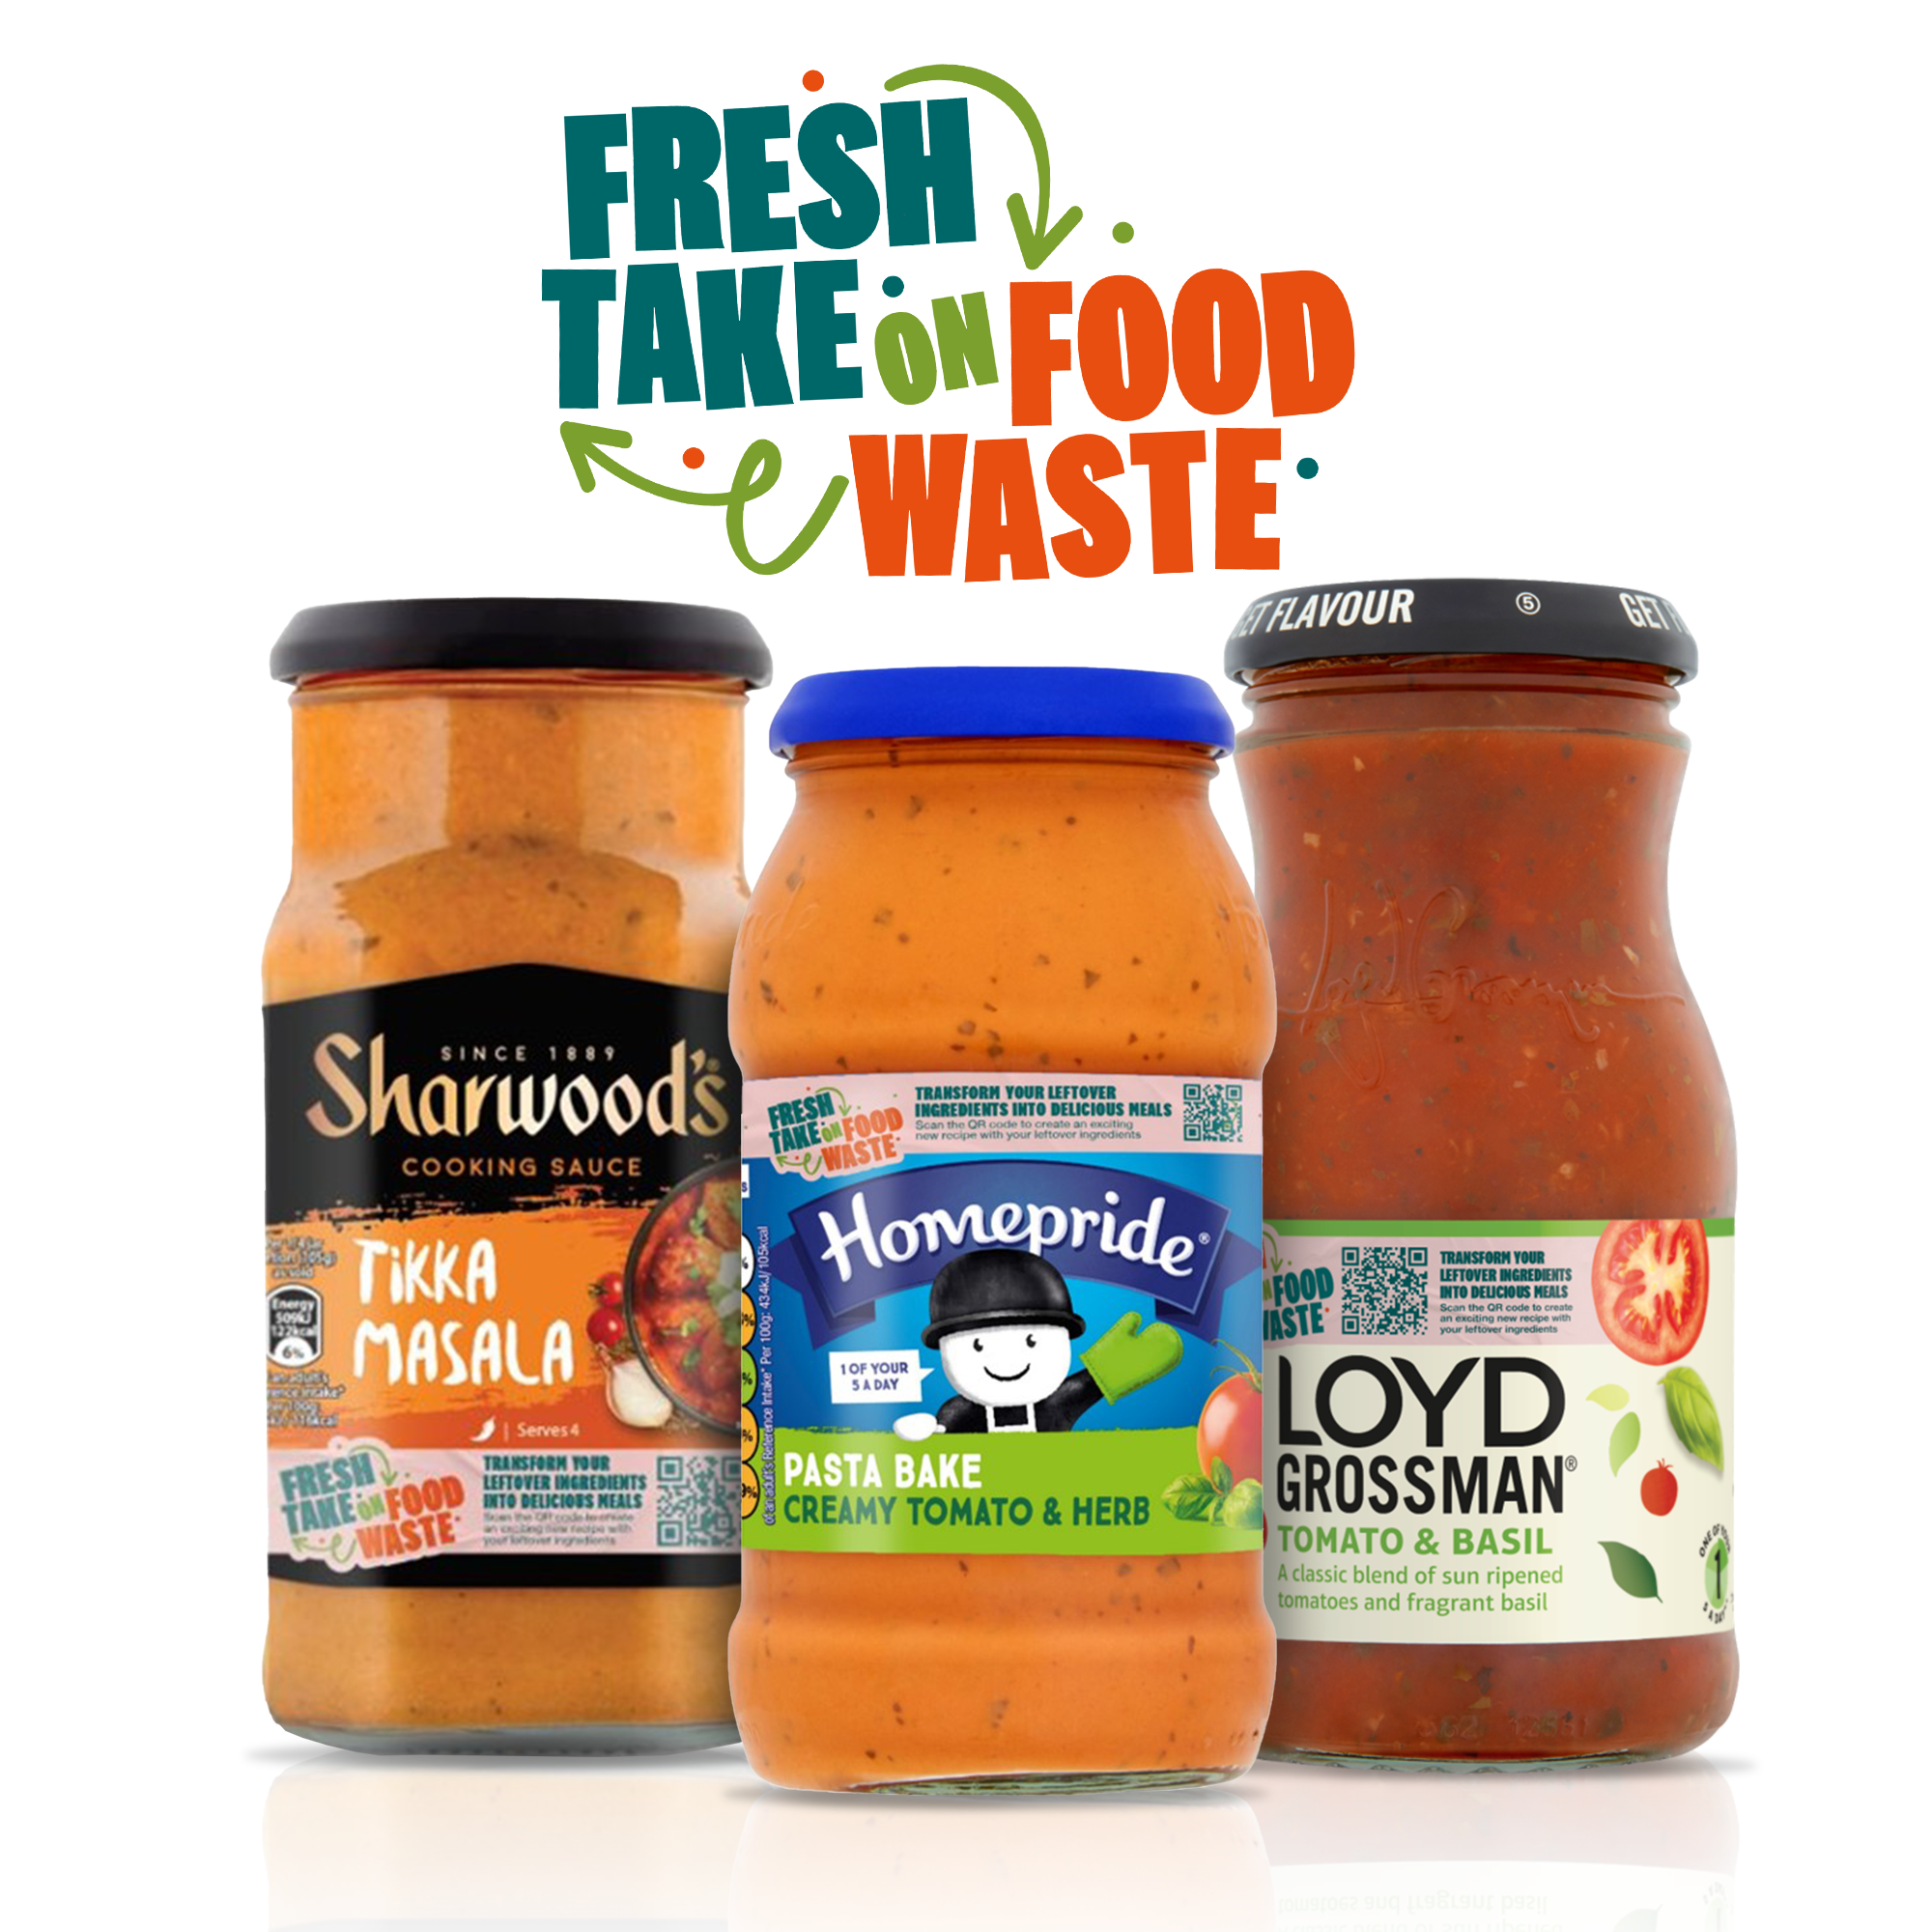 Premier Foods’ ‘fresh take on food waste’ means new recipes from leftovers